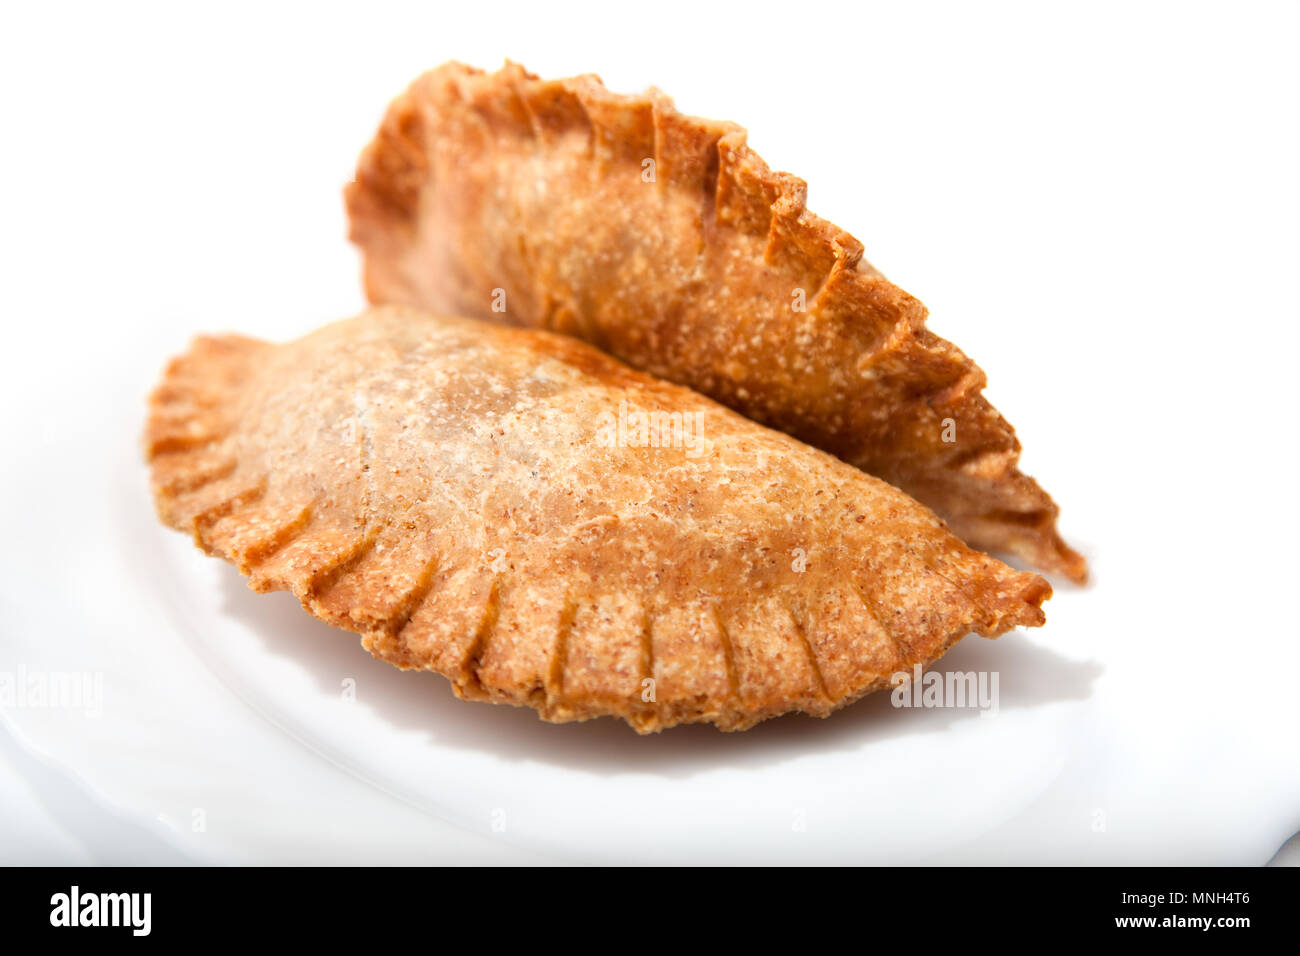 Crispy Vegetable samosa on plate- thin pastry wrapped around a veggie filling and fried. An Arab or Asian treat. Stock Photo